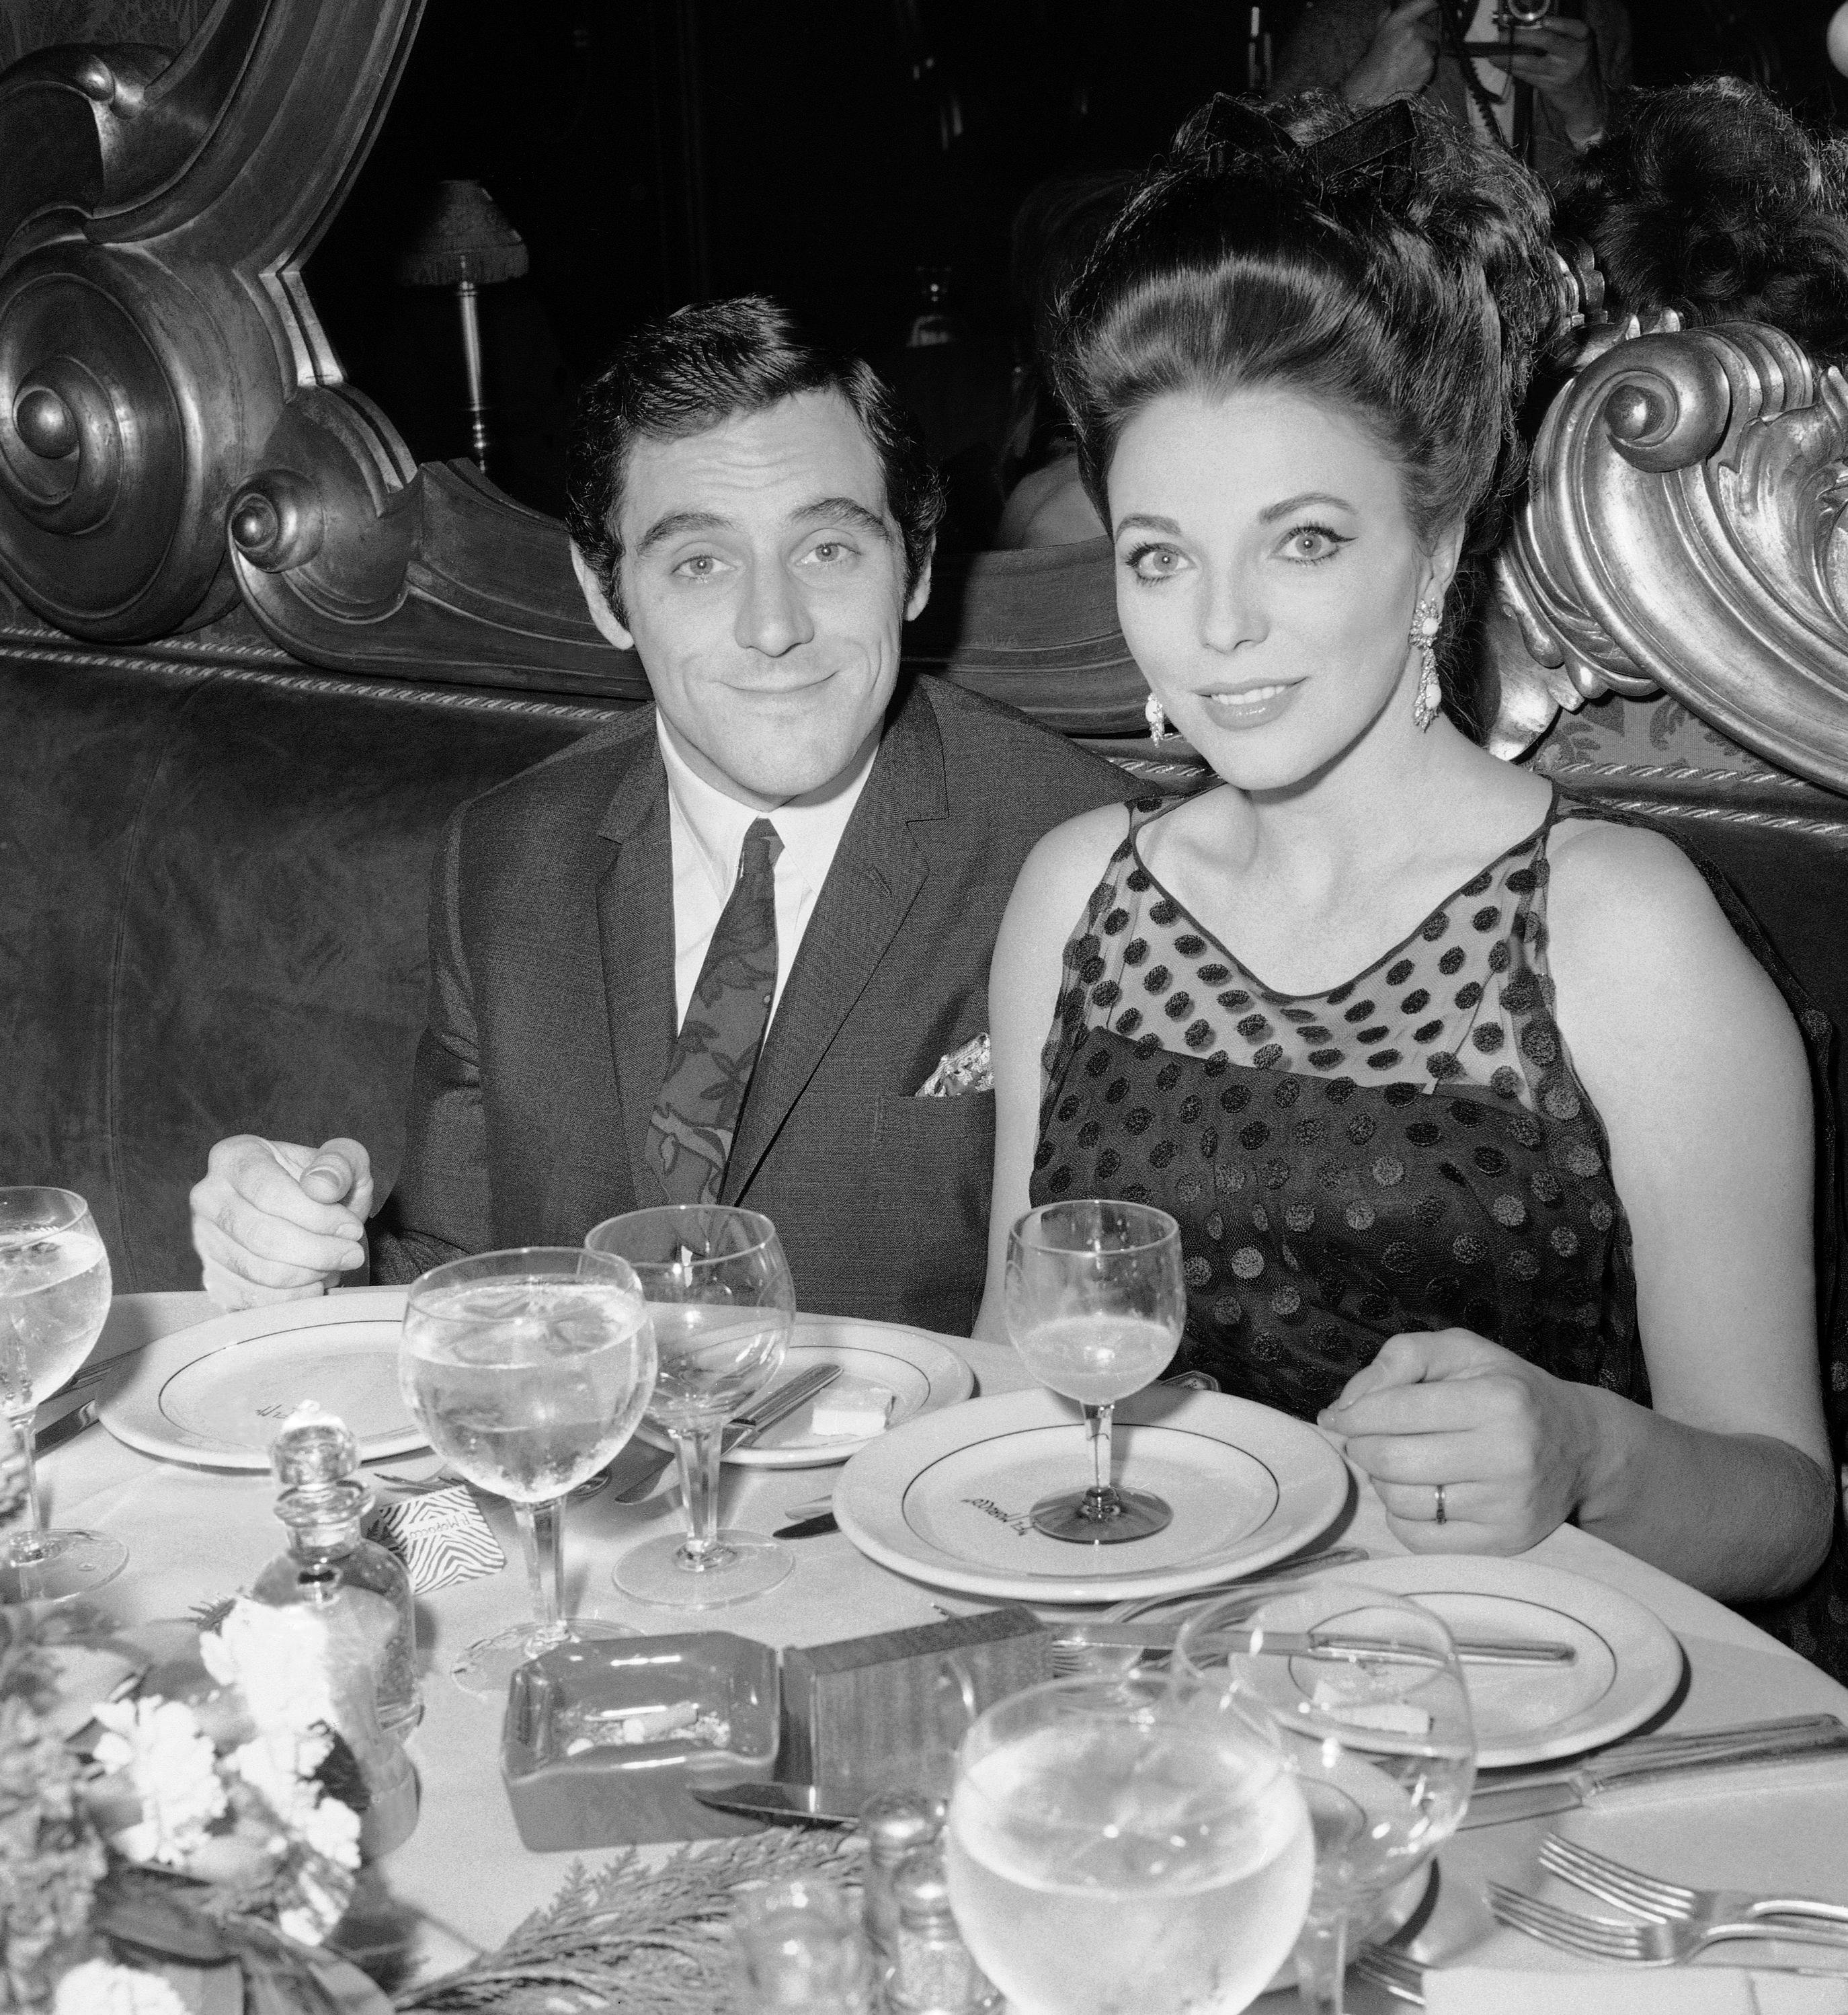 Anthony Newley star and author of British musical 'Stop the world-I want to get off' poses with his bride at New York's El Morocco May 28, 1963. Newley, currently starring on Broadway, was married May 27 to British actress Joan Collins. It was the second marriage for both. (AP Photo/Matty Zimmerman)